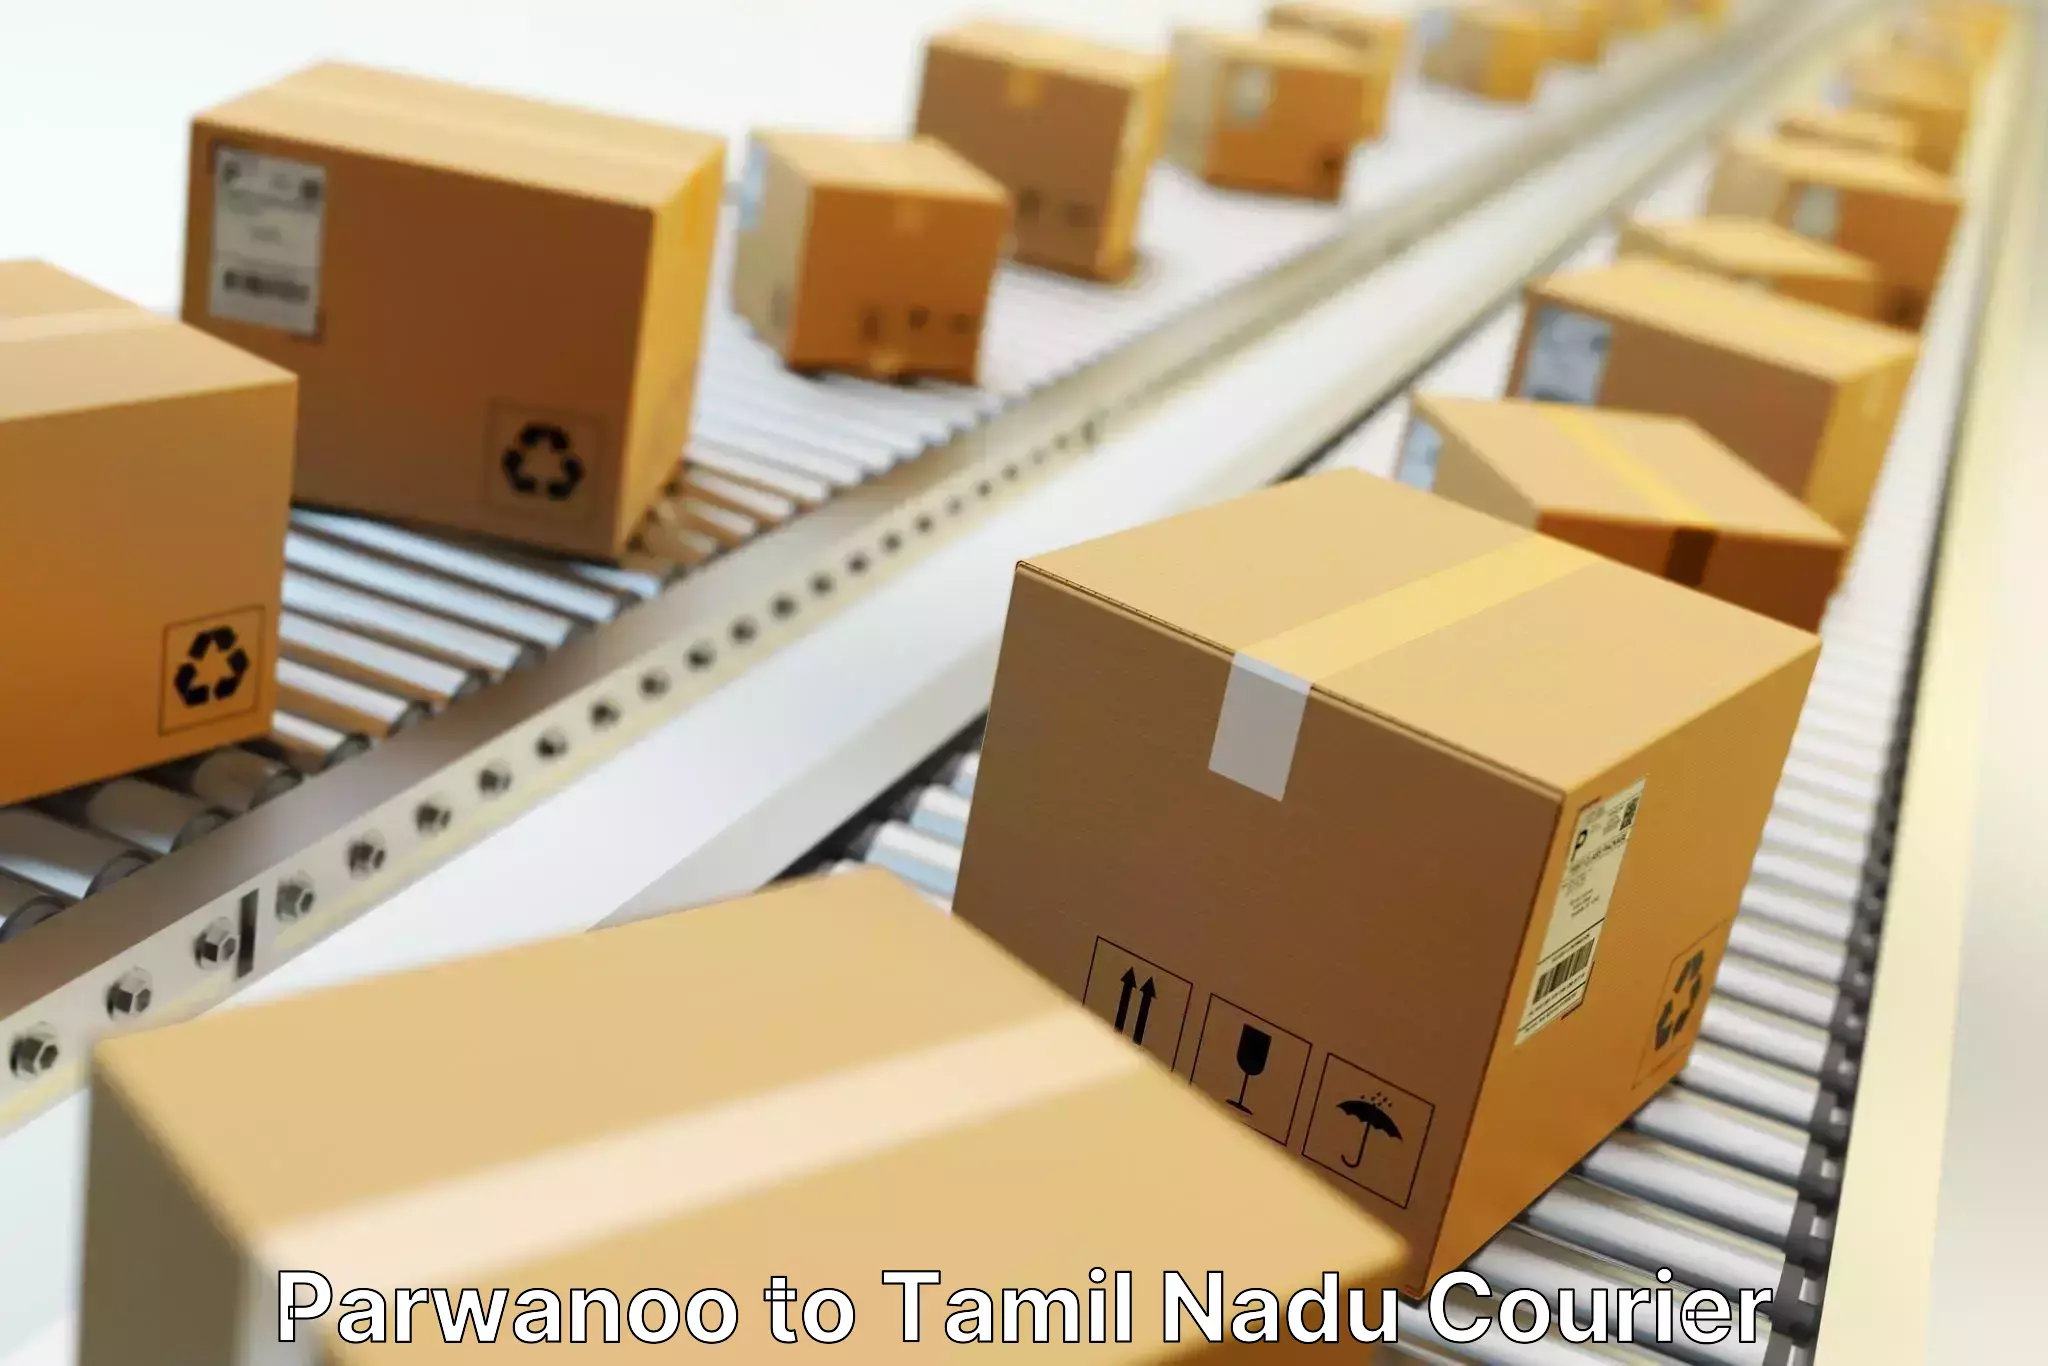 Flexible delivery schedules in Parwanoo to Vellore